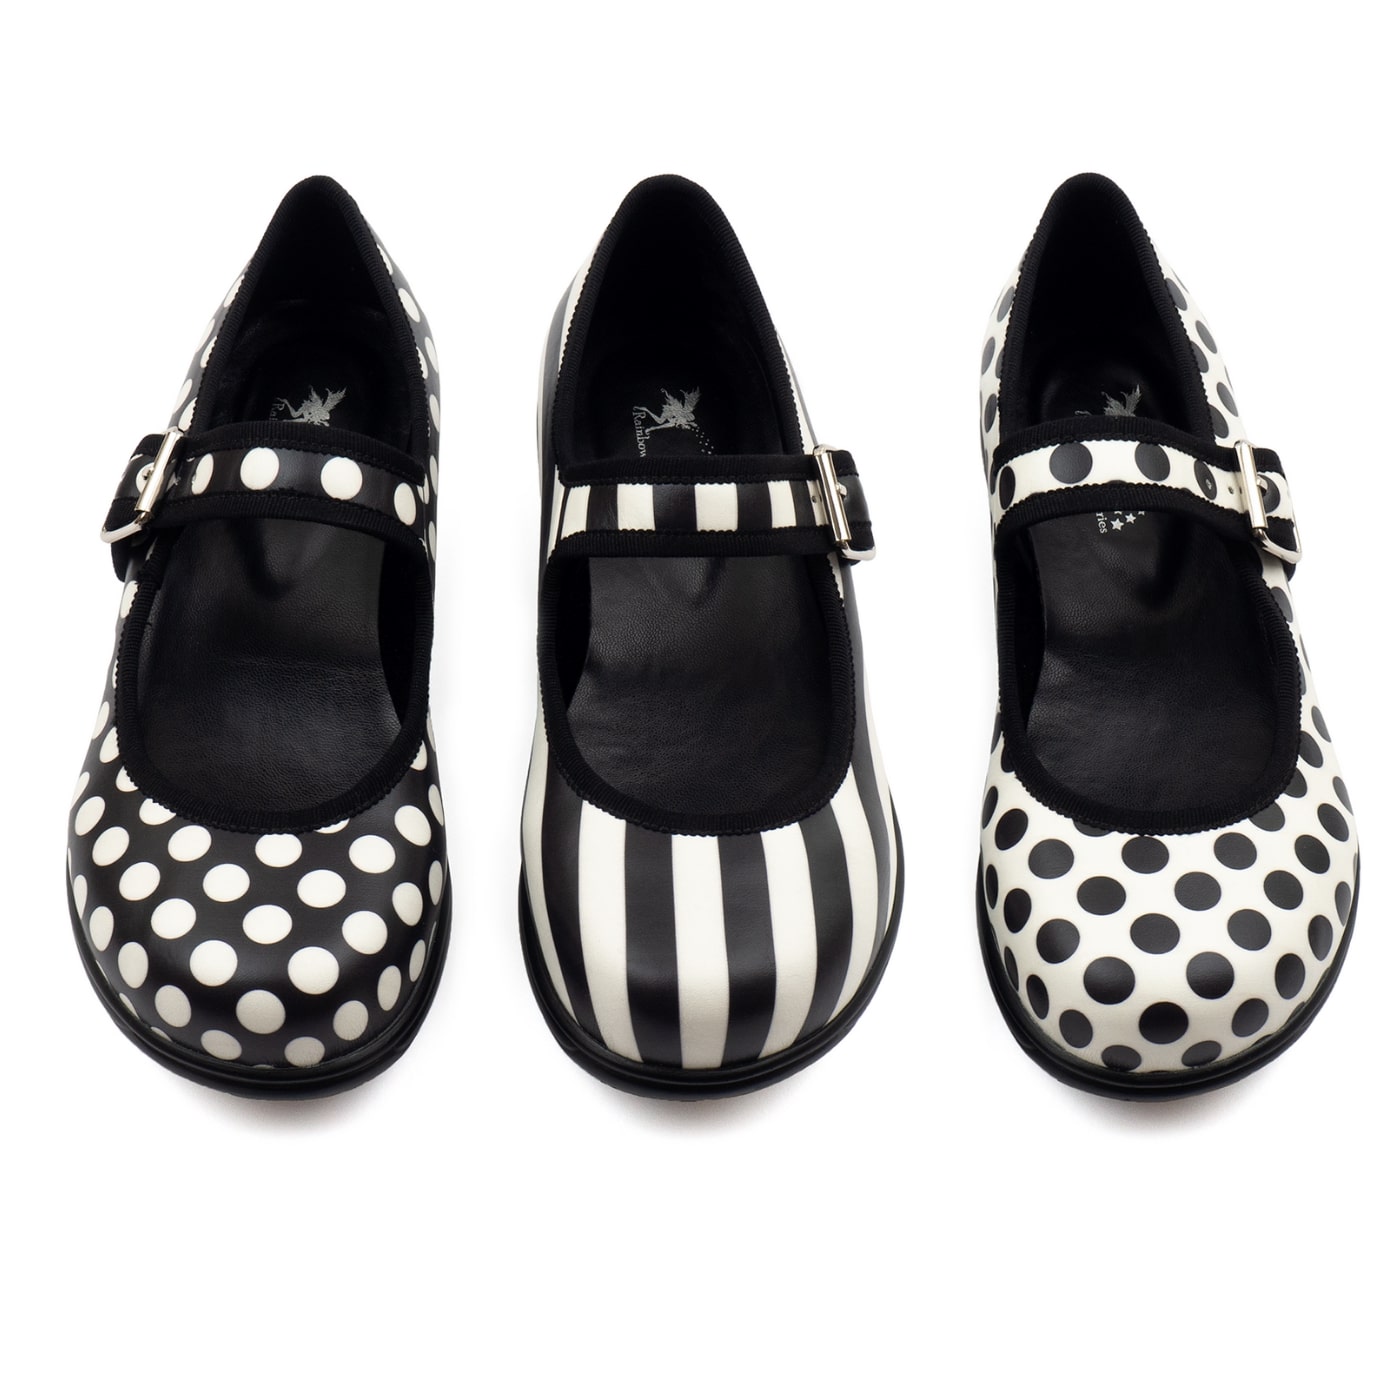 Monochrome Mary Janes by RainbowsAndFairies.com (Black & White - Polka Dots - Stripes - Mismatched Shoes - Shoes - Pair & A Spare) - SKU: FW_MARYJ_MONOC_ORG - Pic 03